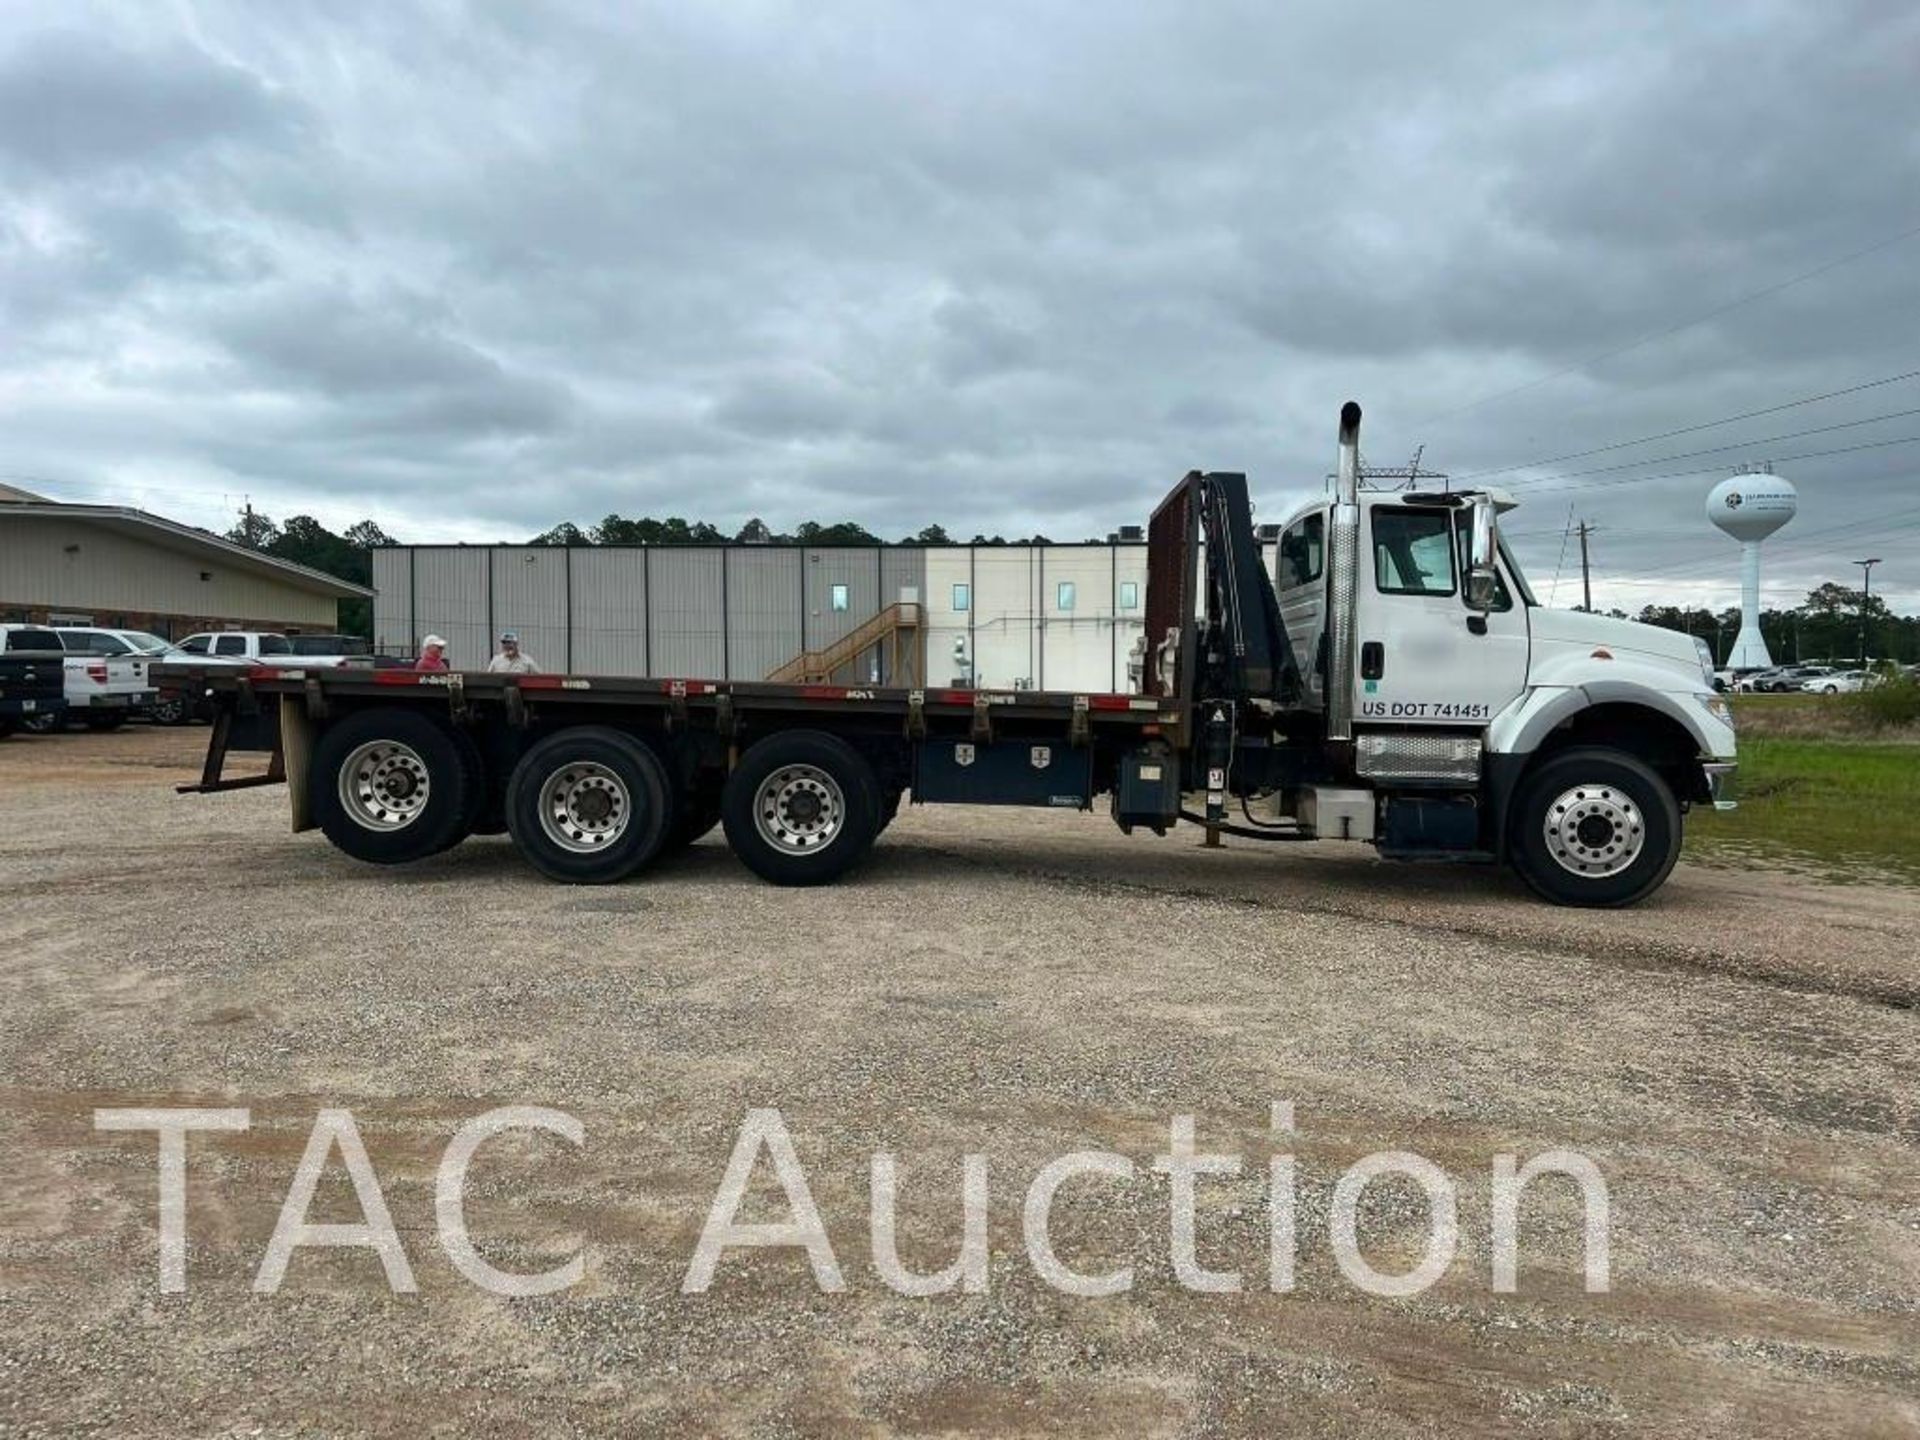 2007 International 7600 Tri-Axle Flatbed Truck W/ Knuckle Boom - Image 7 of 88